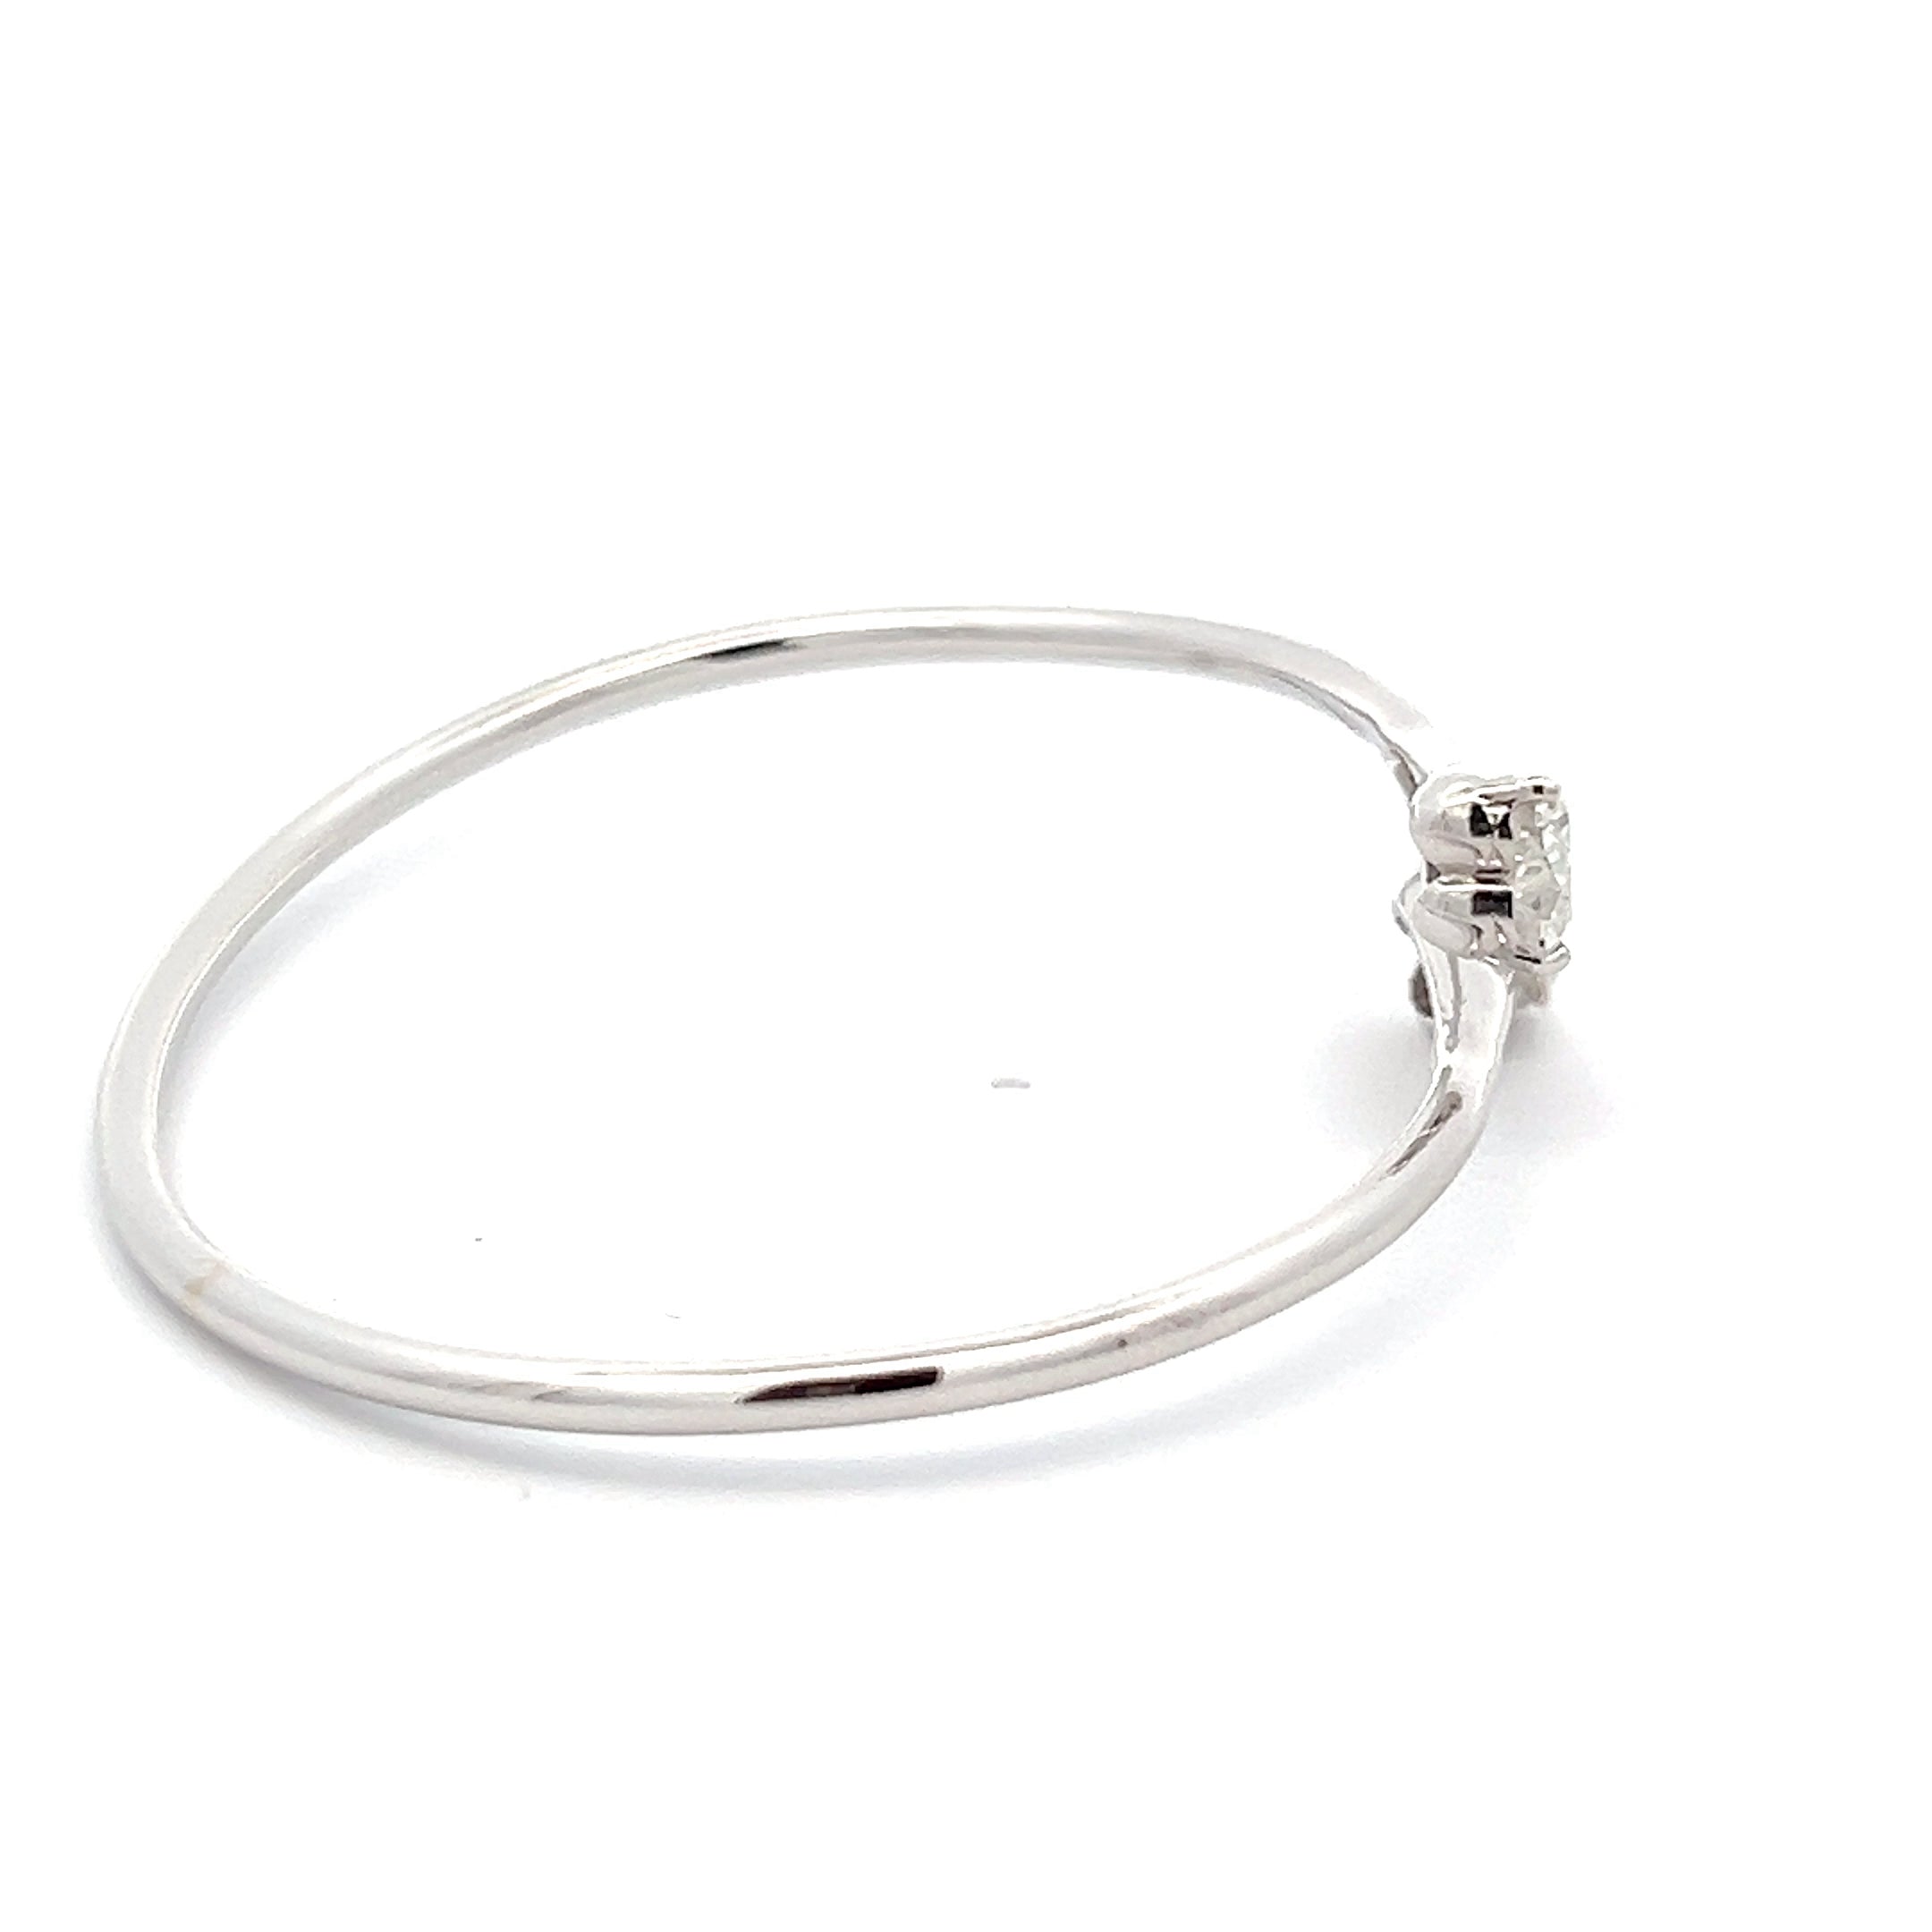 Dainty Charming Bracelet is 2.00ct in Heart Shape Solitaire 14k White Gold With Lab Grown Moissanite